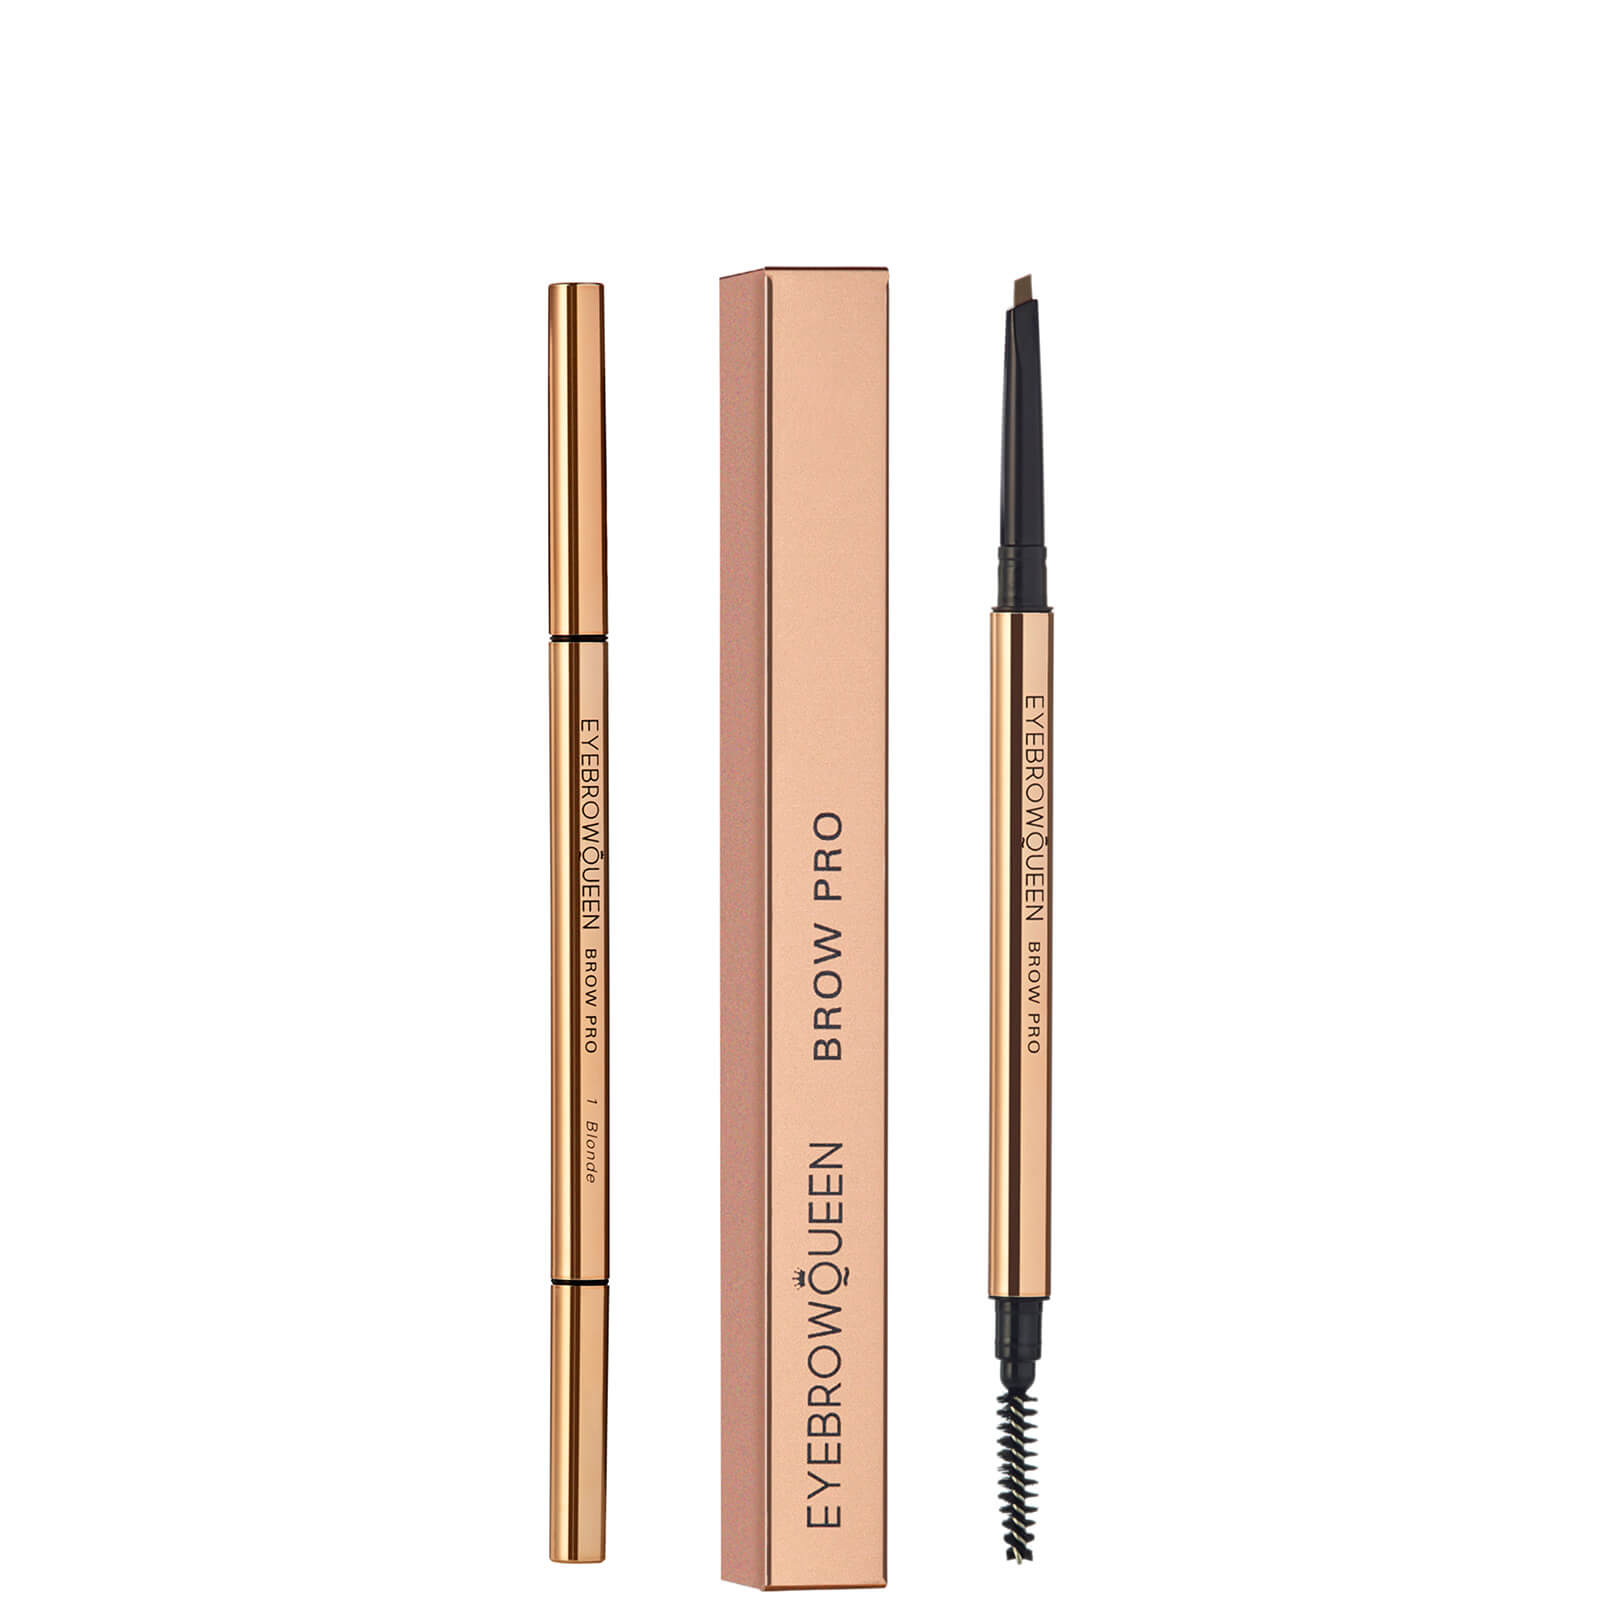 Image of Brow Pro Pencil EyebrowQueen 0,05g (varie tonalità) - Warm Brown